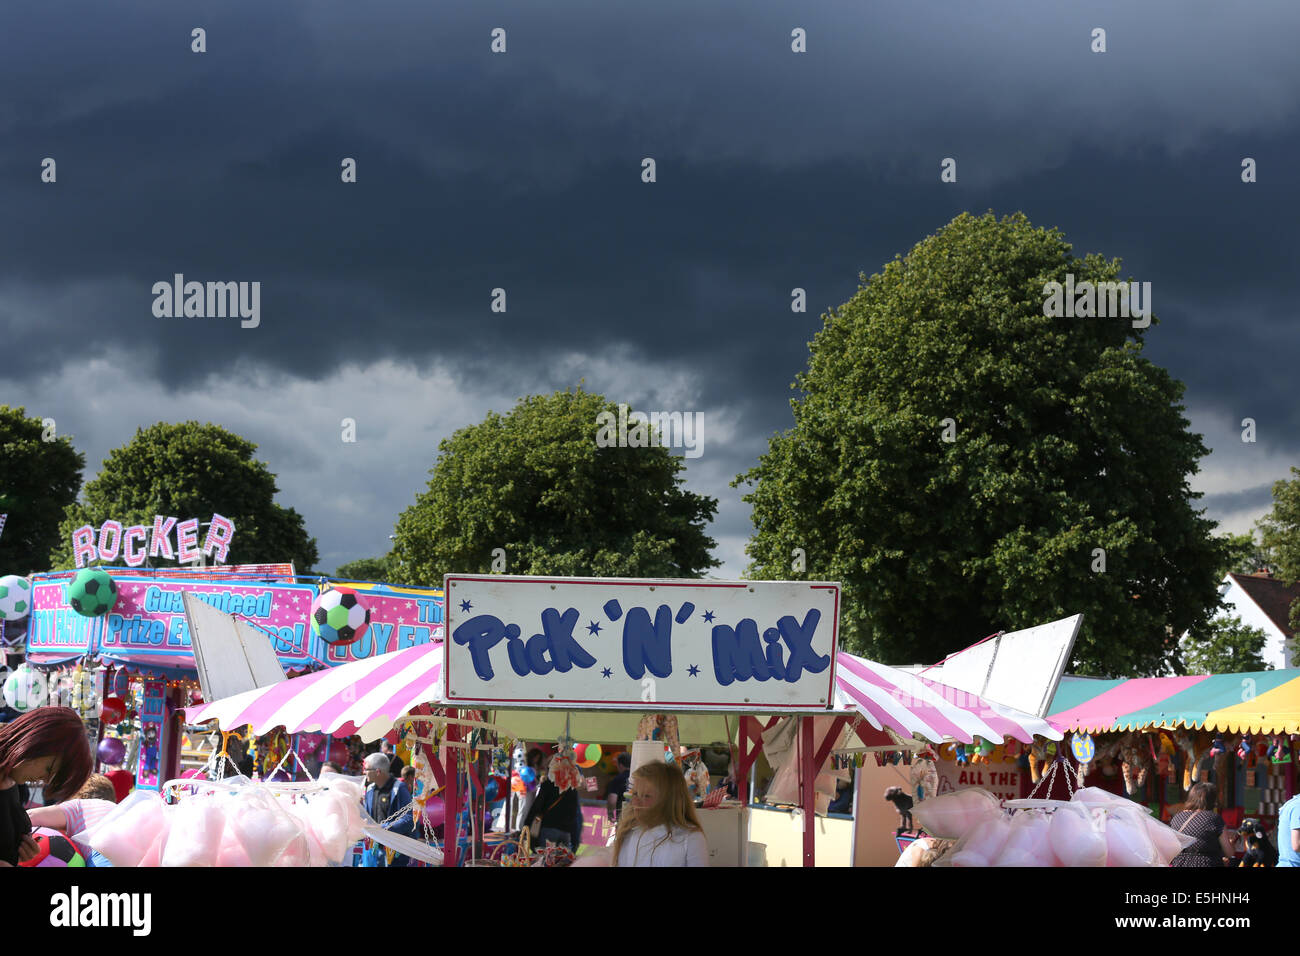 Typical British fairground scene with rides and trees with dark clouds gathering behind it Stock Photo